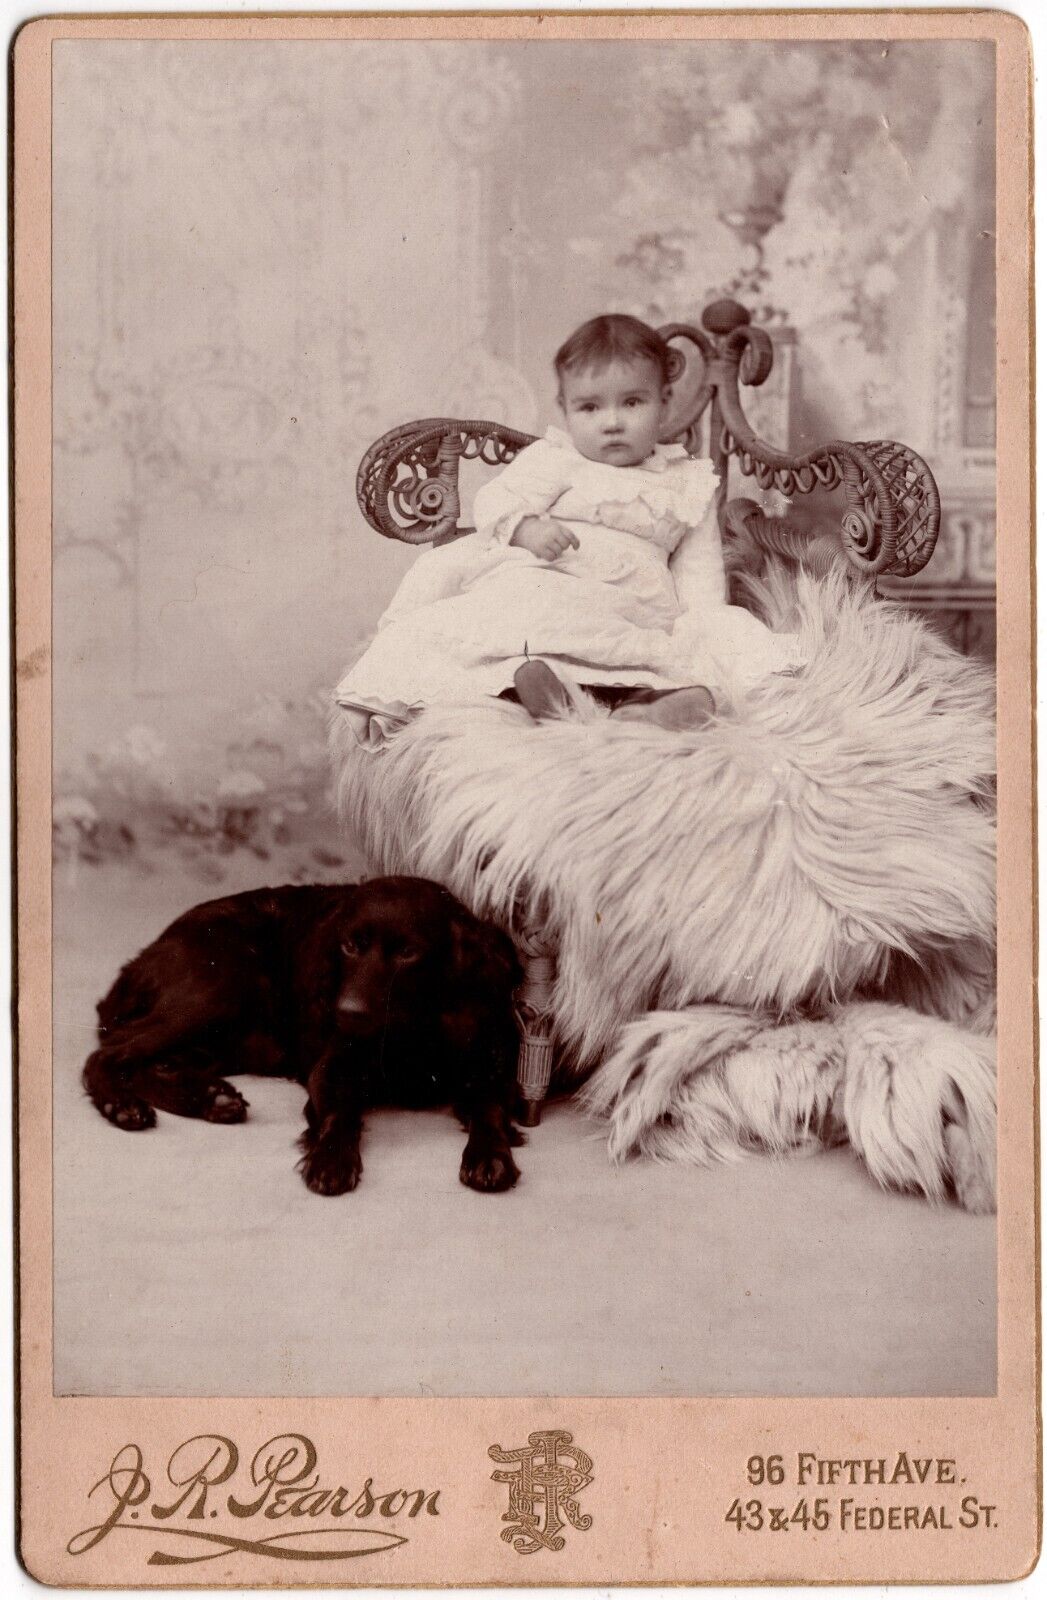 CIRCA 1890s CABINET CARD LITTLE GIRL WITH BOYKIN SPANIEL DOG ALLEGHENY CITY PA.